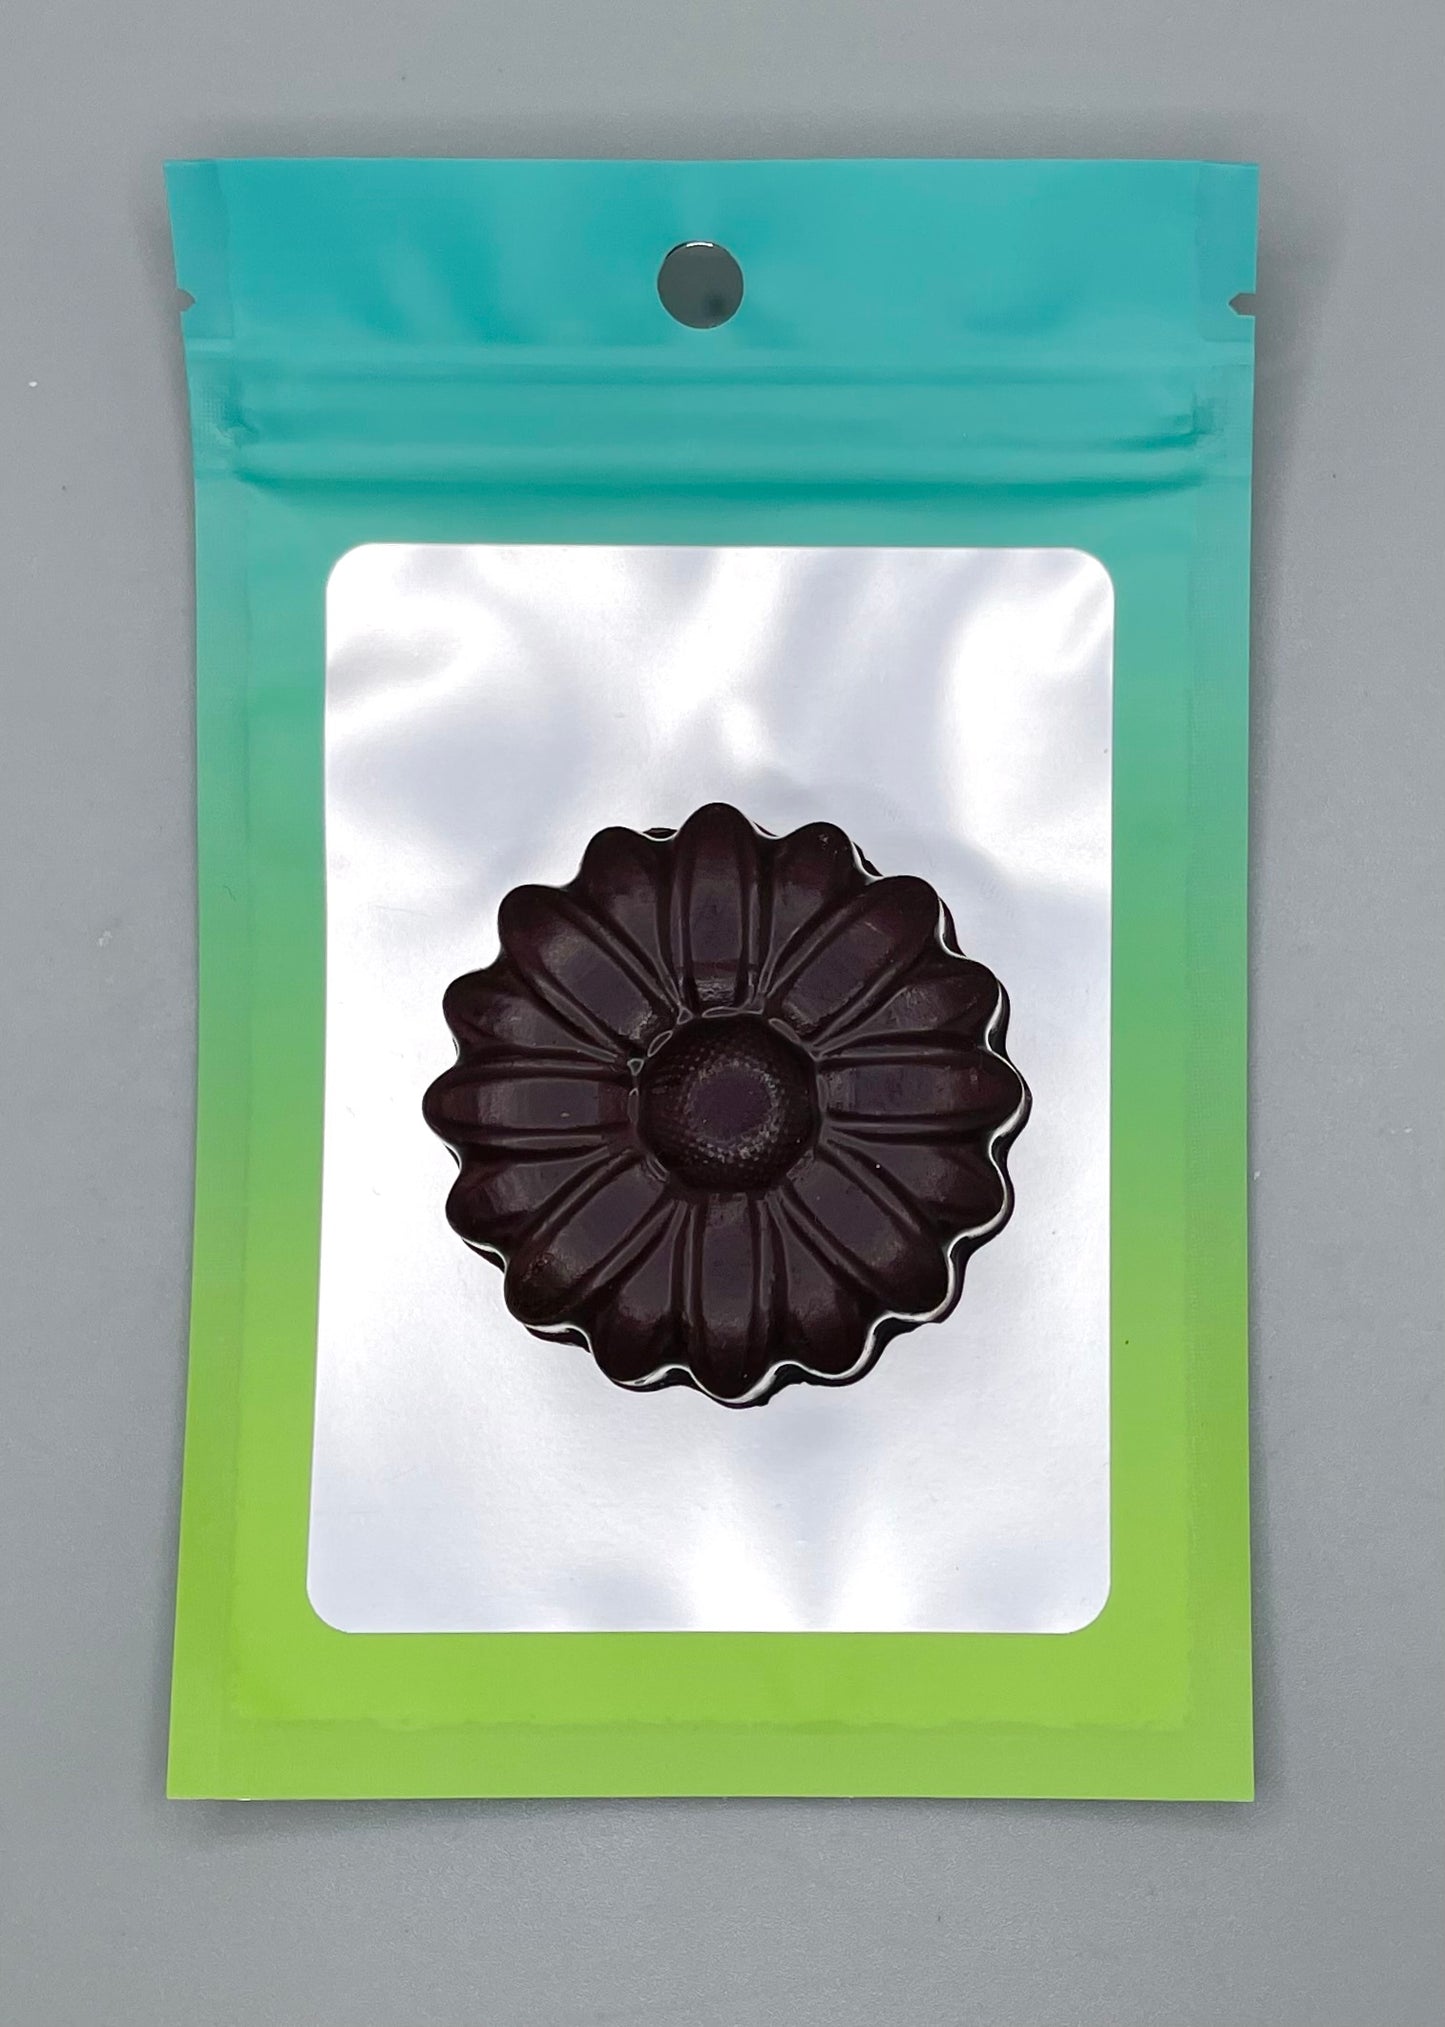 Chocolate "Flower" Sandwich Cookies - available in 2 delicious flavors: Pascha White or 64% Dark Chocolate